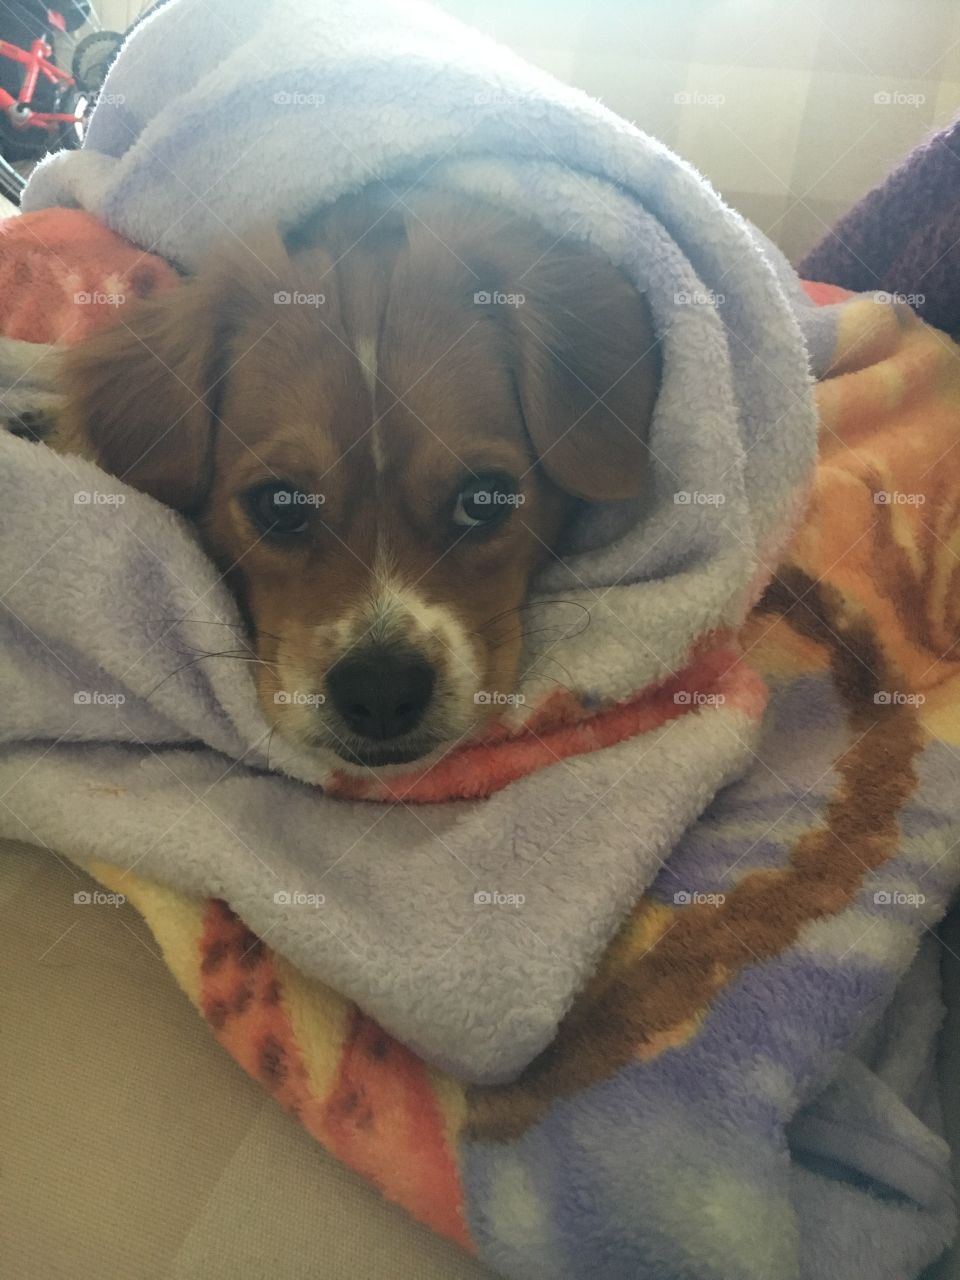 All snuggled up in his Disney blanket